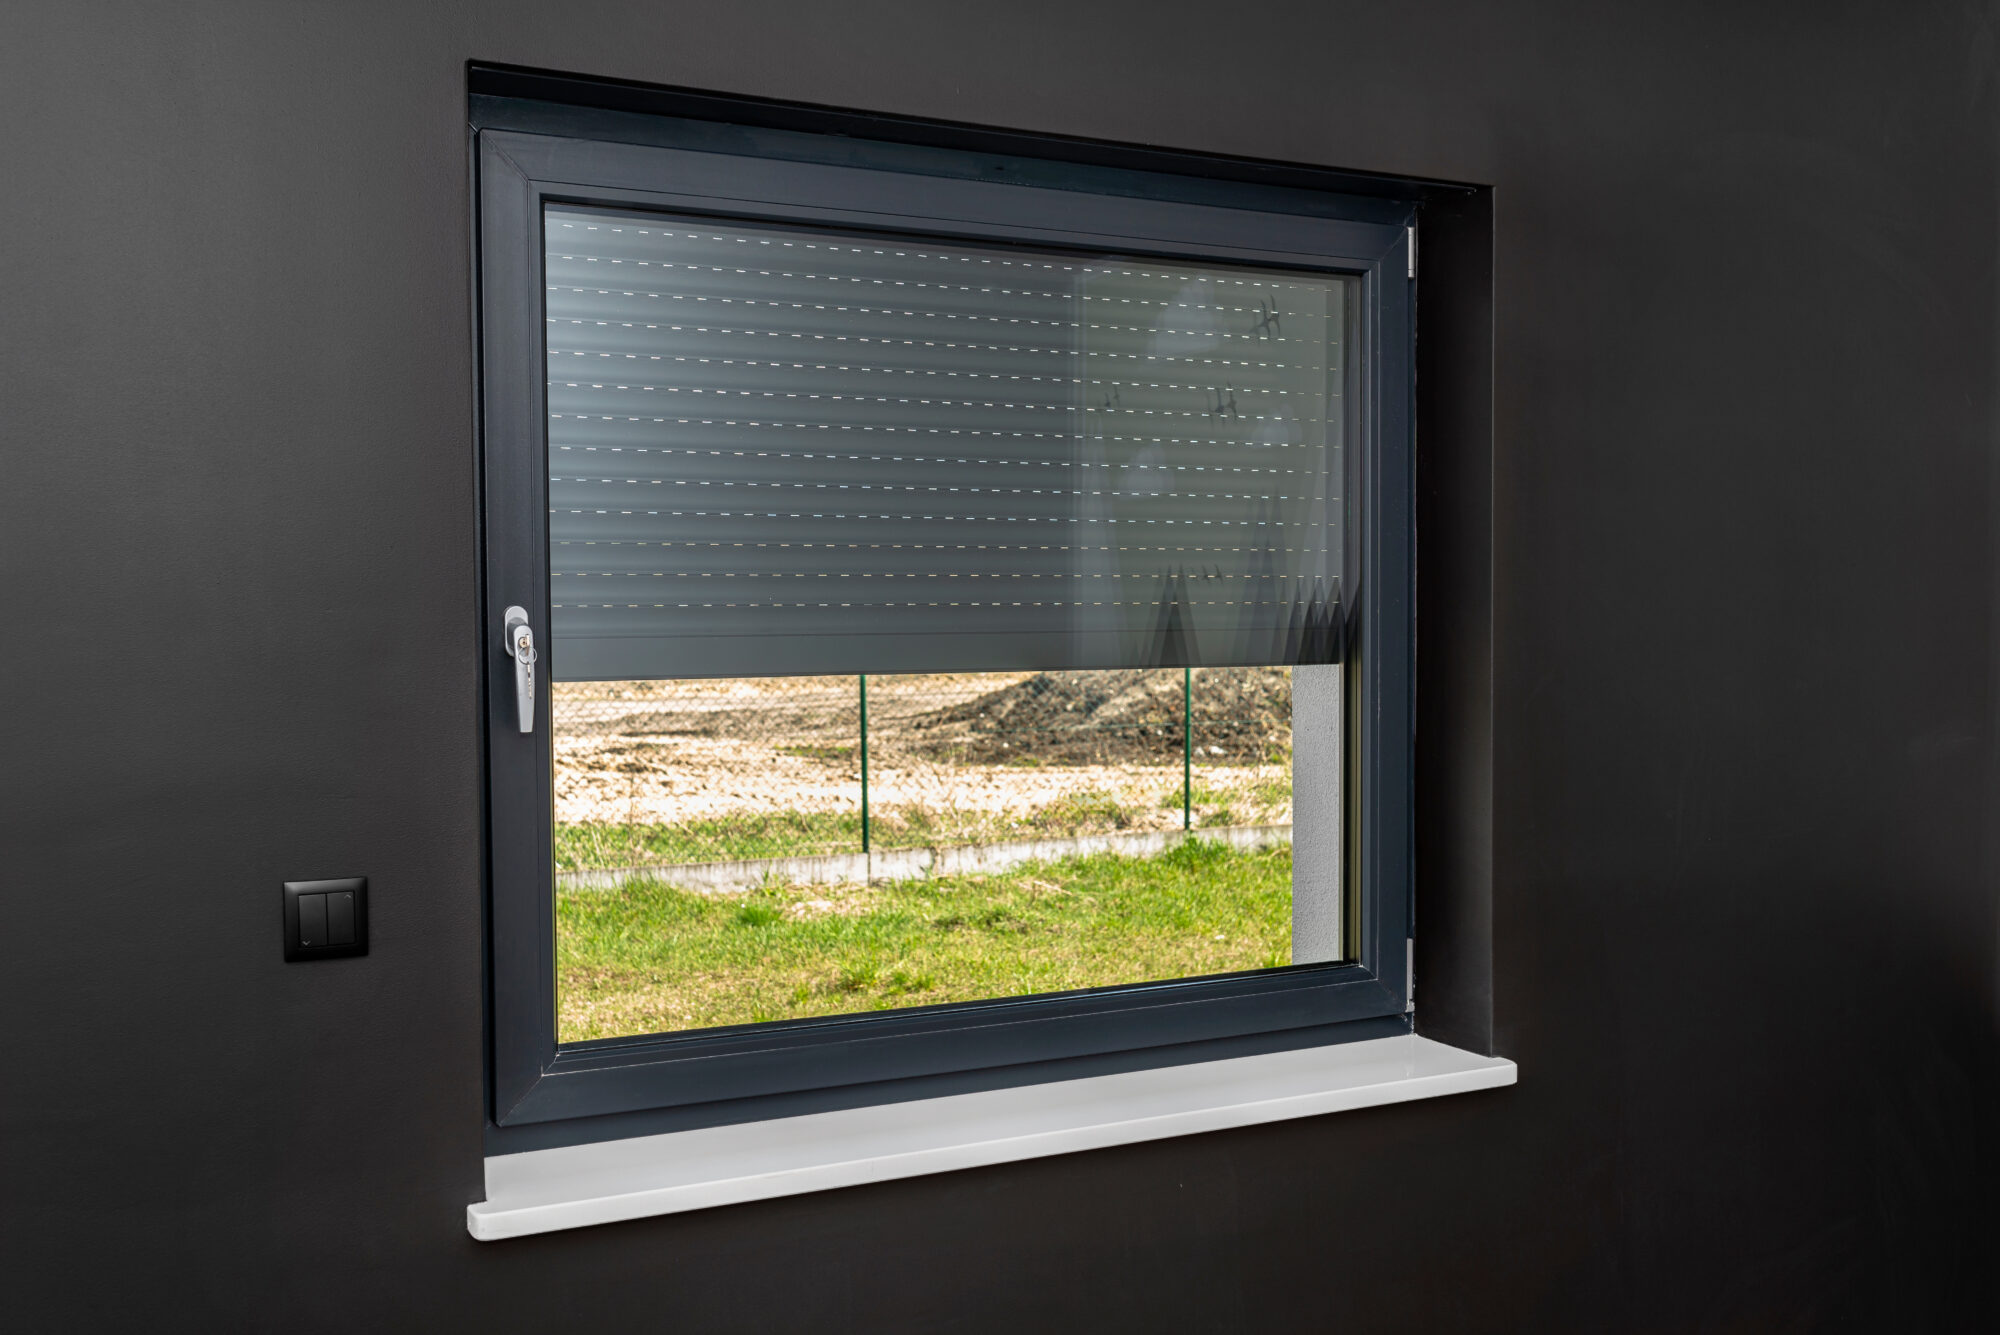 a large window in a room with black walls, half covered with external blinds